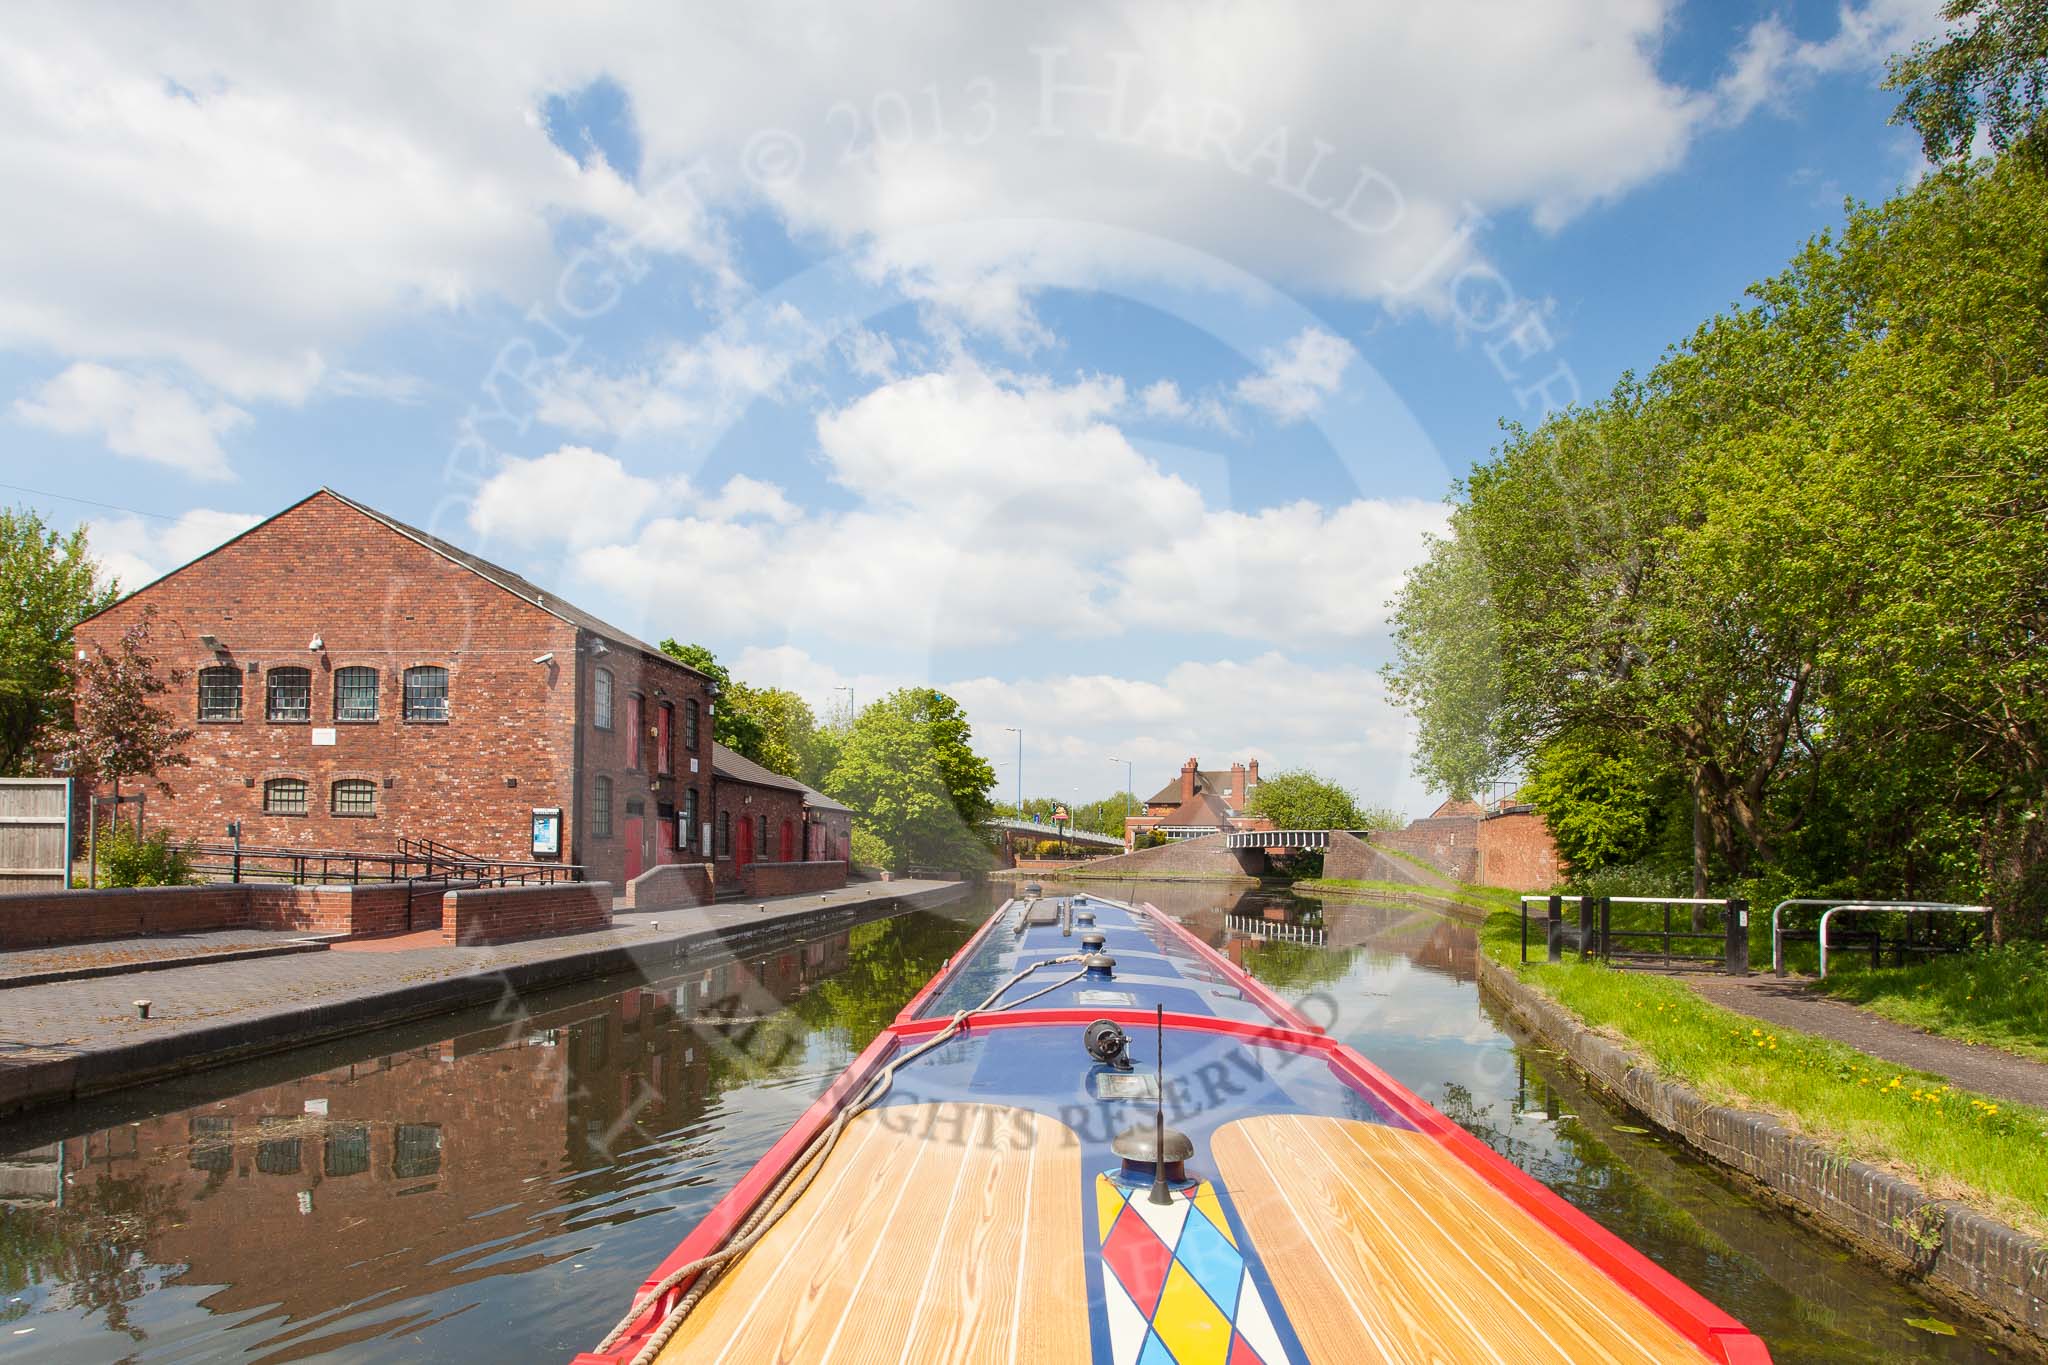 BCN Marathon Challenge 2013: Tipton Factory Junction, where the BCN Old Main Line meets the New Main Line. On the left the Malthouse Stables renovated a few years ago..
Birmingham Canal Navigation,


United Kingdom,
on 25 May 2013 at 14:45, image #201